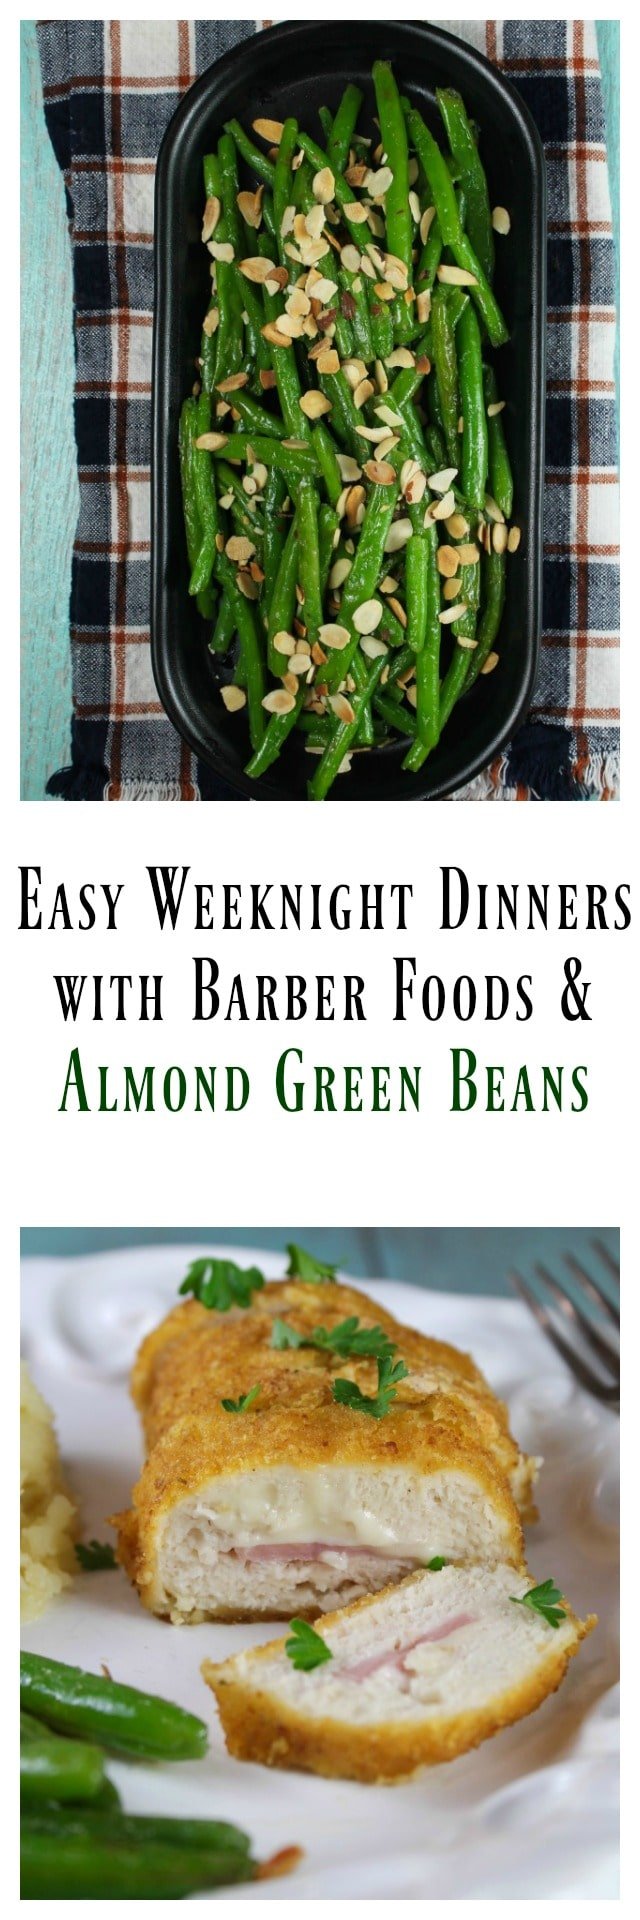 Easy weeknight dinners with Barber Foods Stuffed Chicken Breasts and my favorite Almond Green Beans Recipe from MissintheKitchen.com #ad 